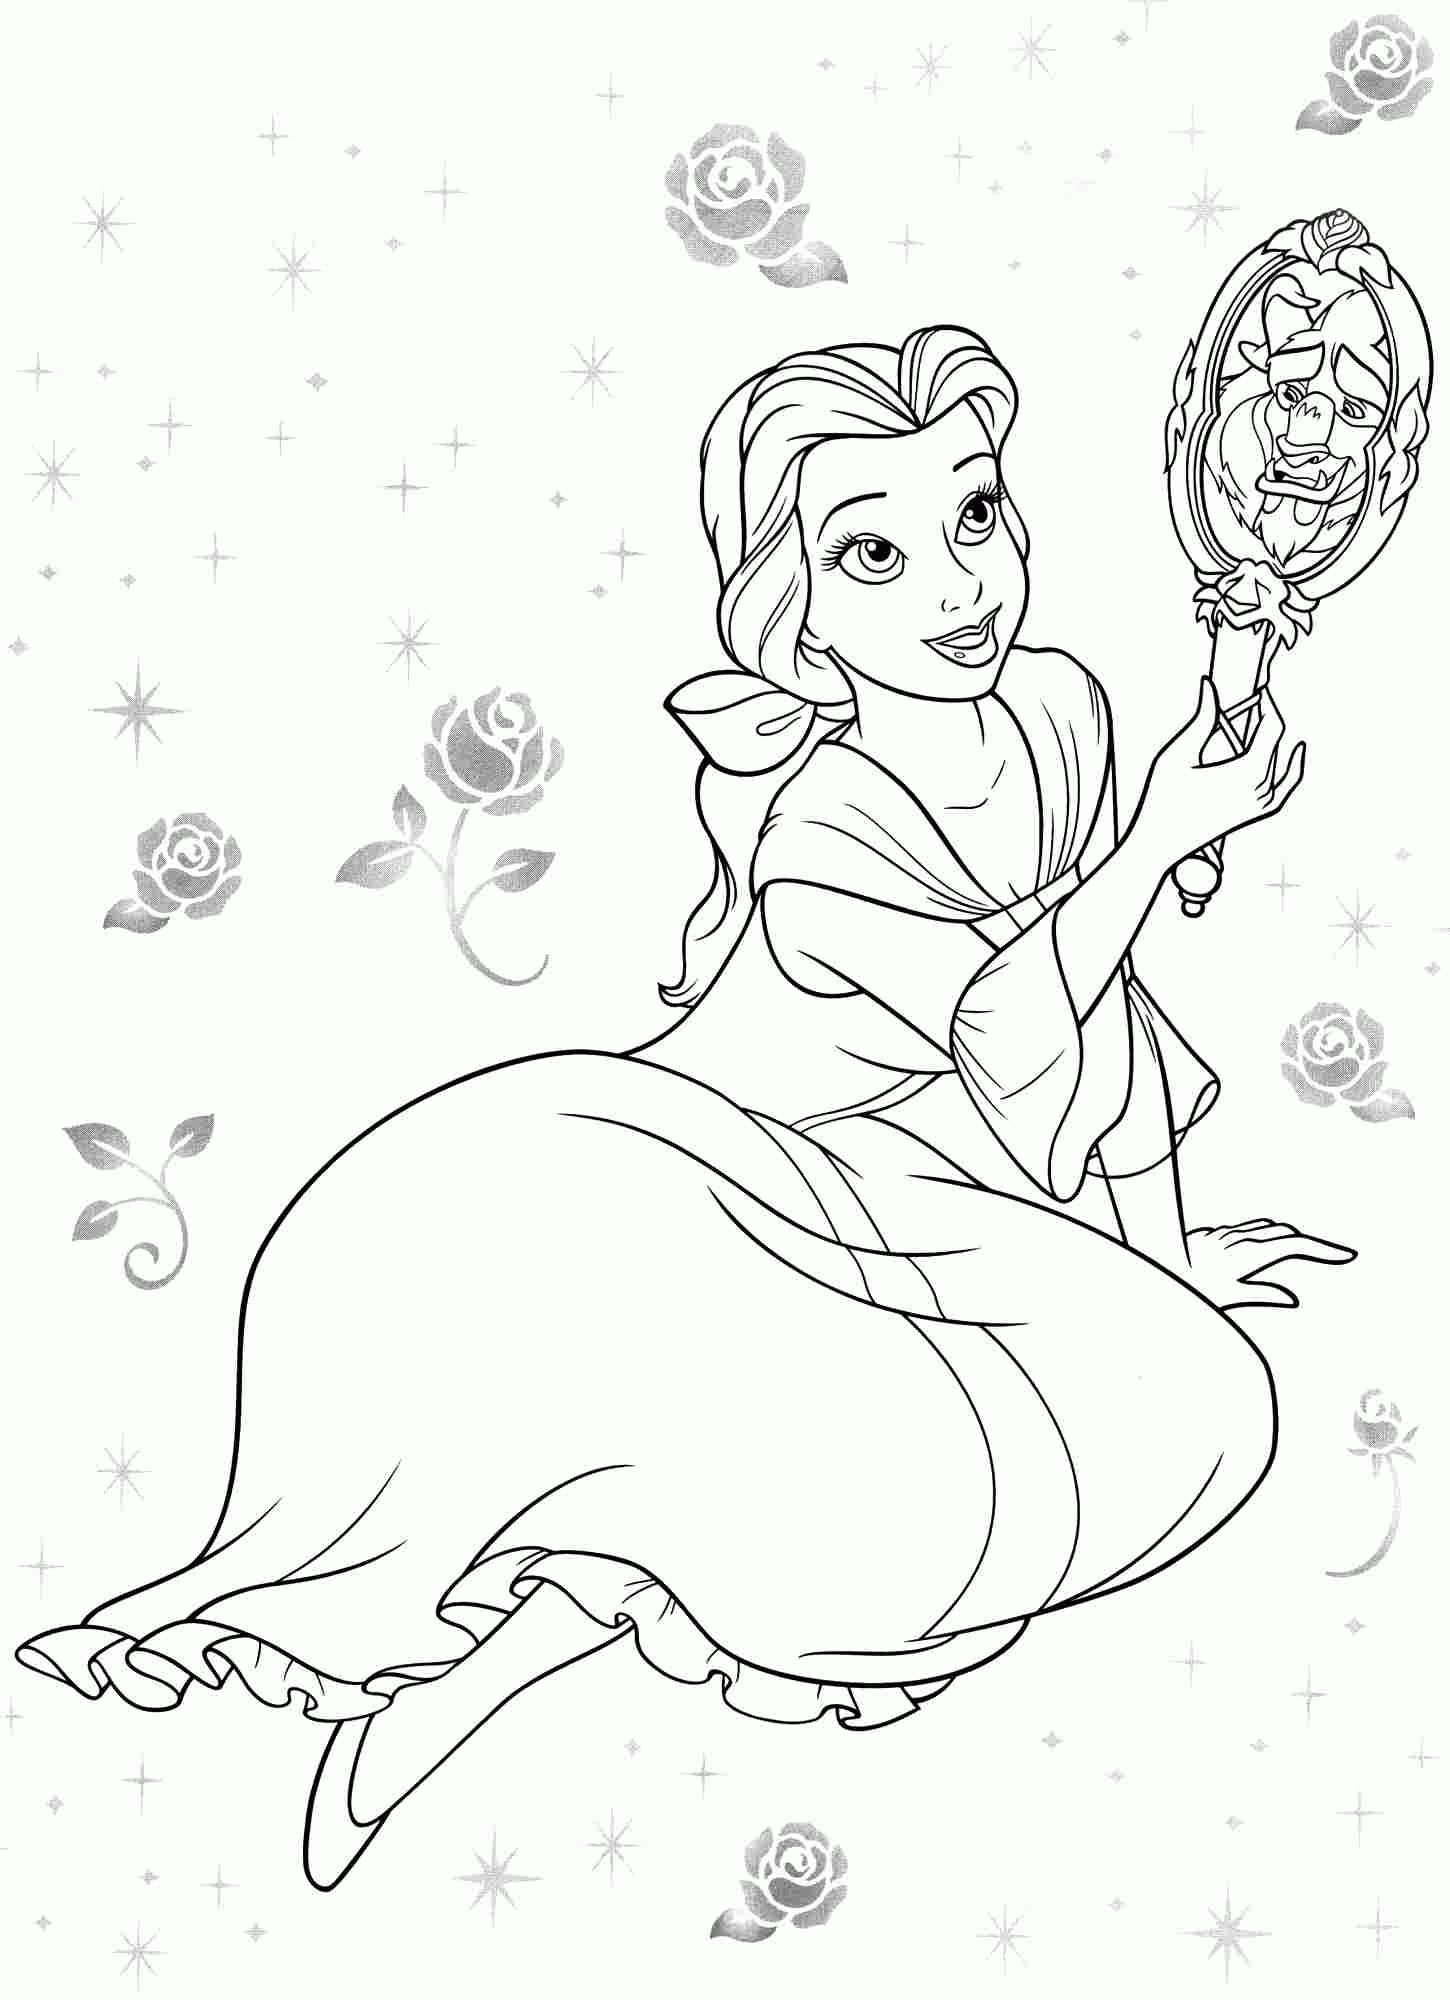 Free Disney Coloring Pages Belle Download Free Disney Coloring Pages